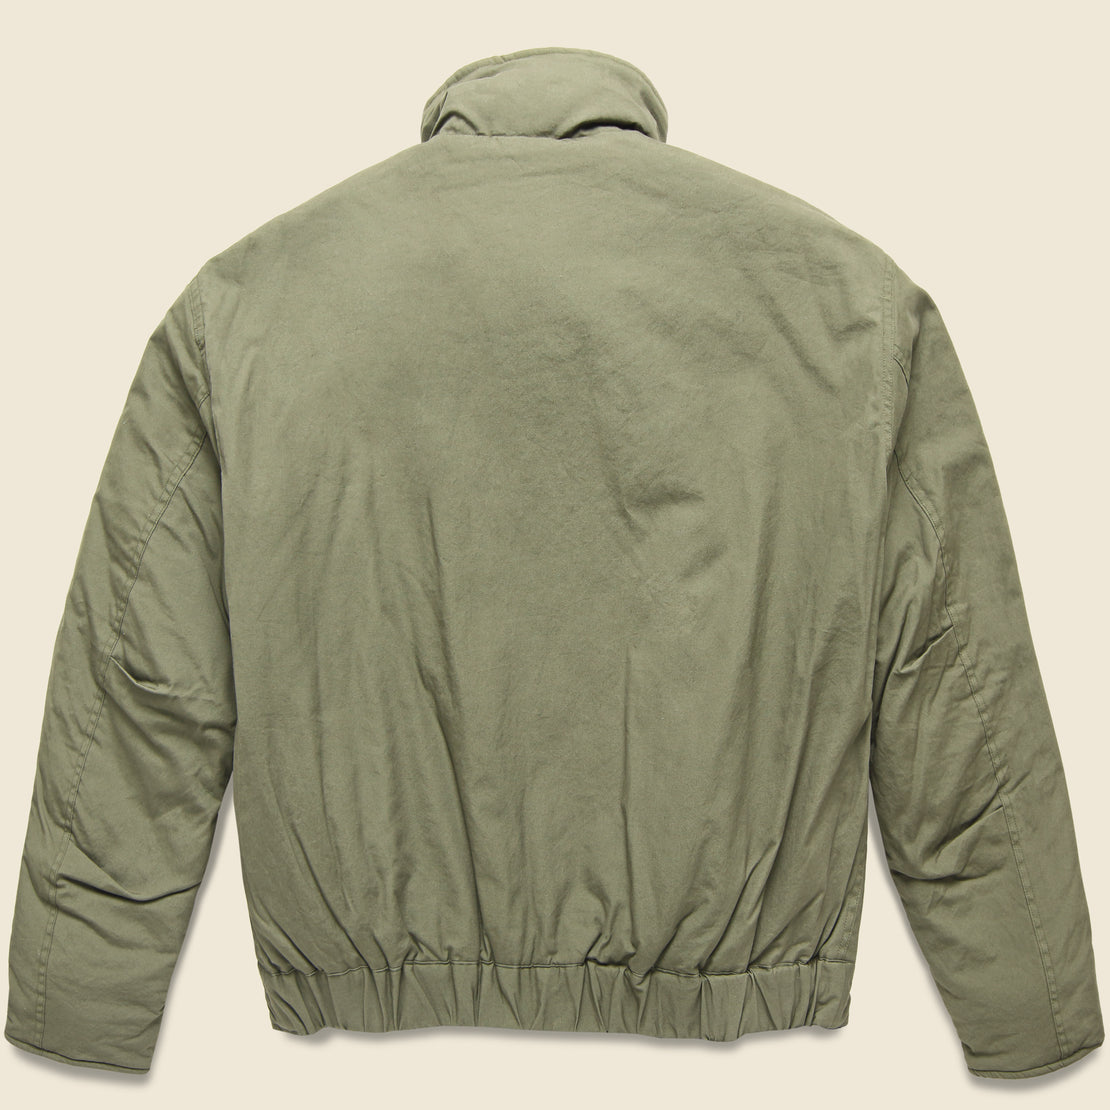 Vancloth Tankers Jacket - Olive - Monitaly - STAG Provisions - Outerwear - Coat / Jacket